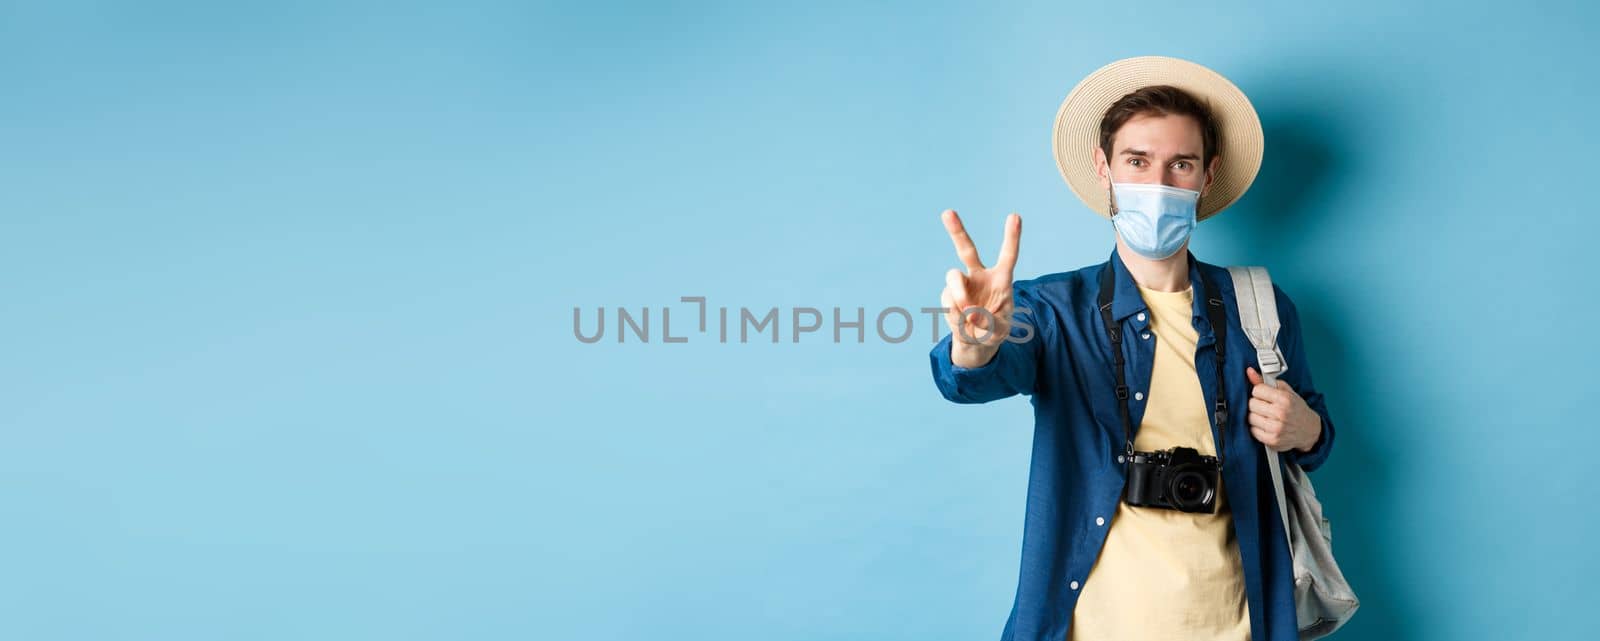 Covid-19, pandemic and travel concept. Positive guy going on vacation, wearing summer hat and medical mask, showing peace sign, standing with backpack and camera on blue background.